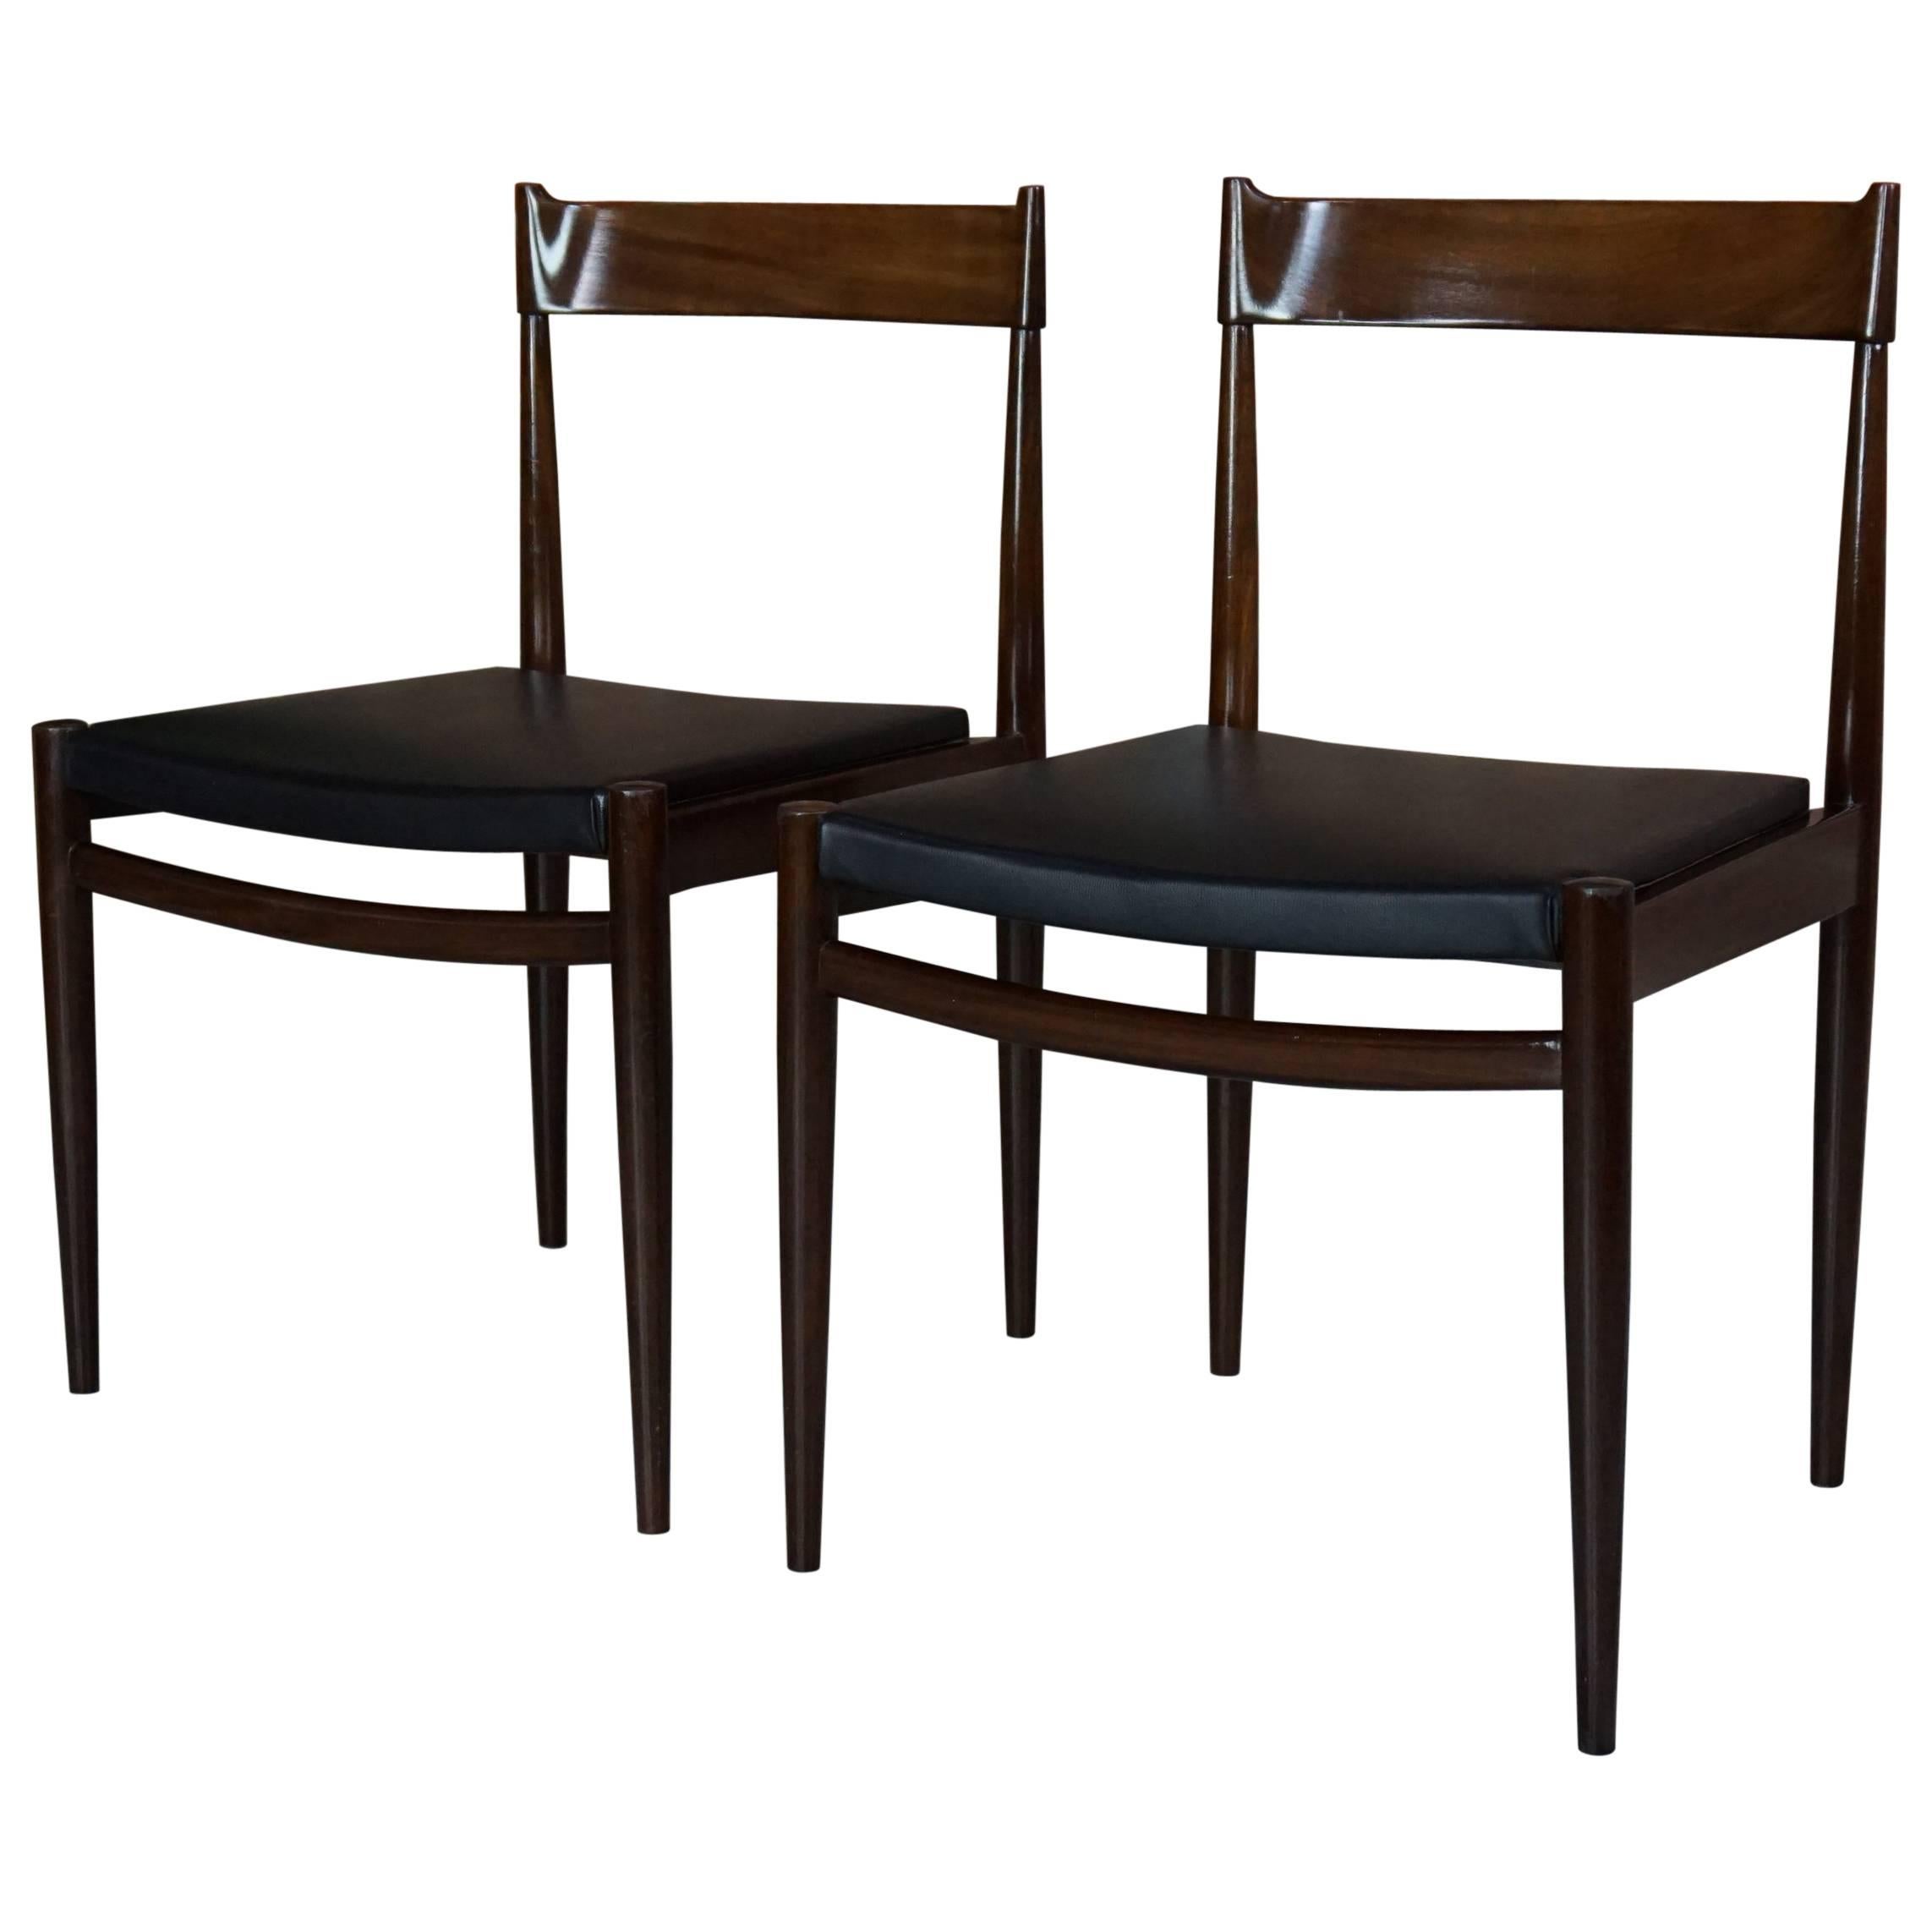 Pair of Teak Chairs and Faux Black Leather Design from the 1950s